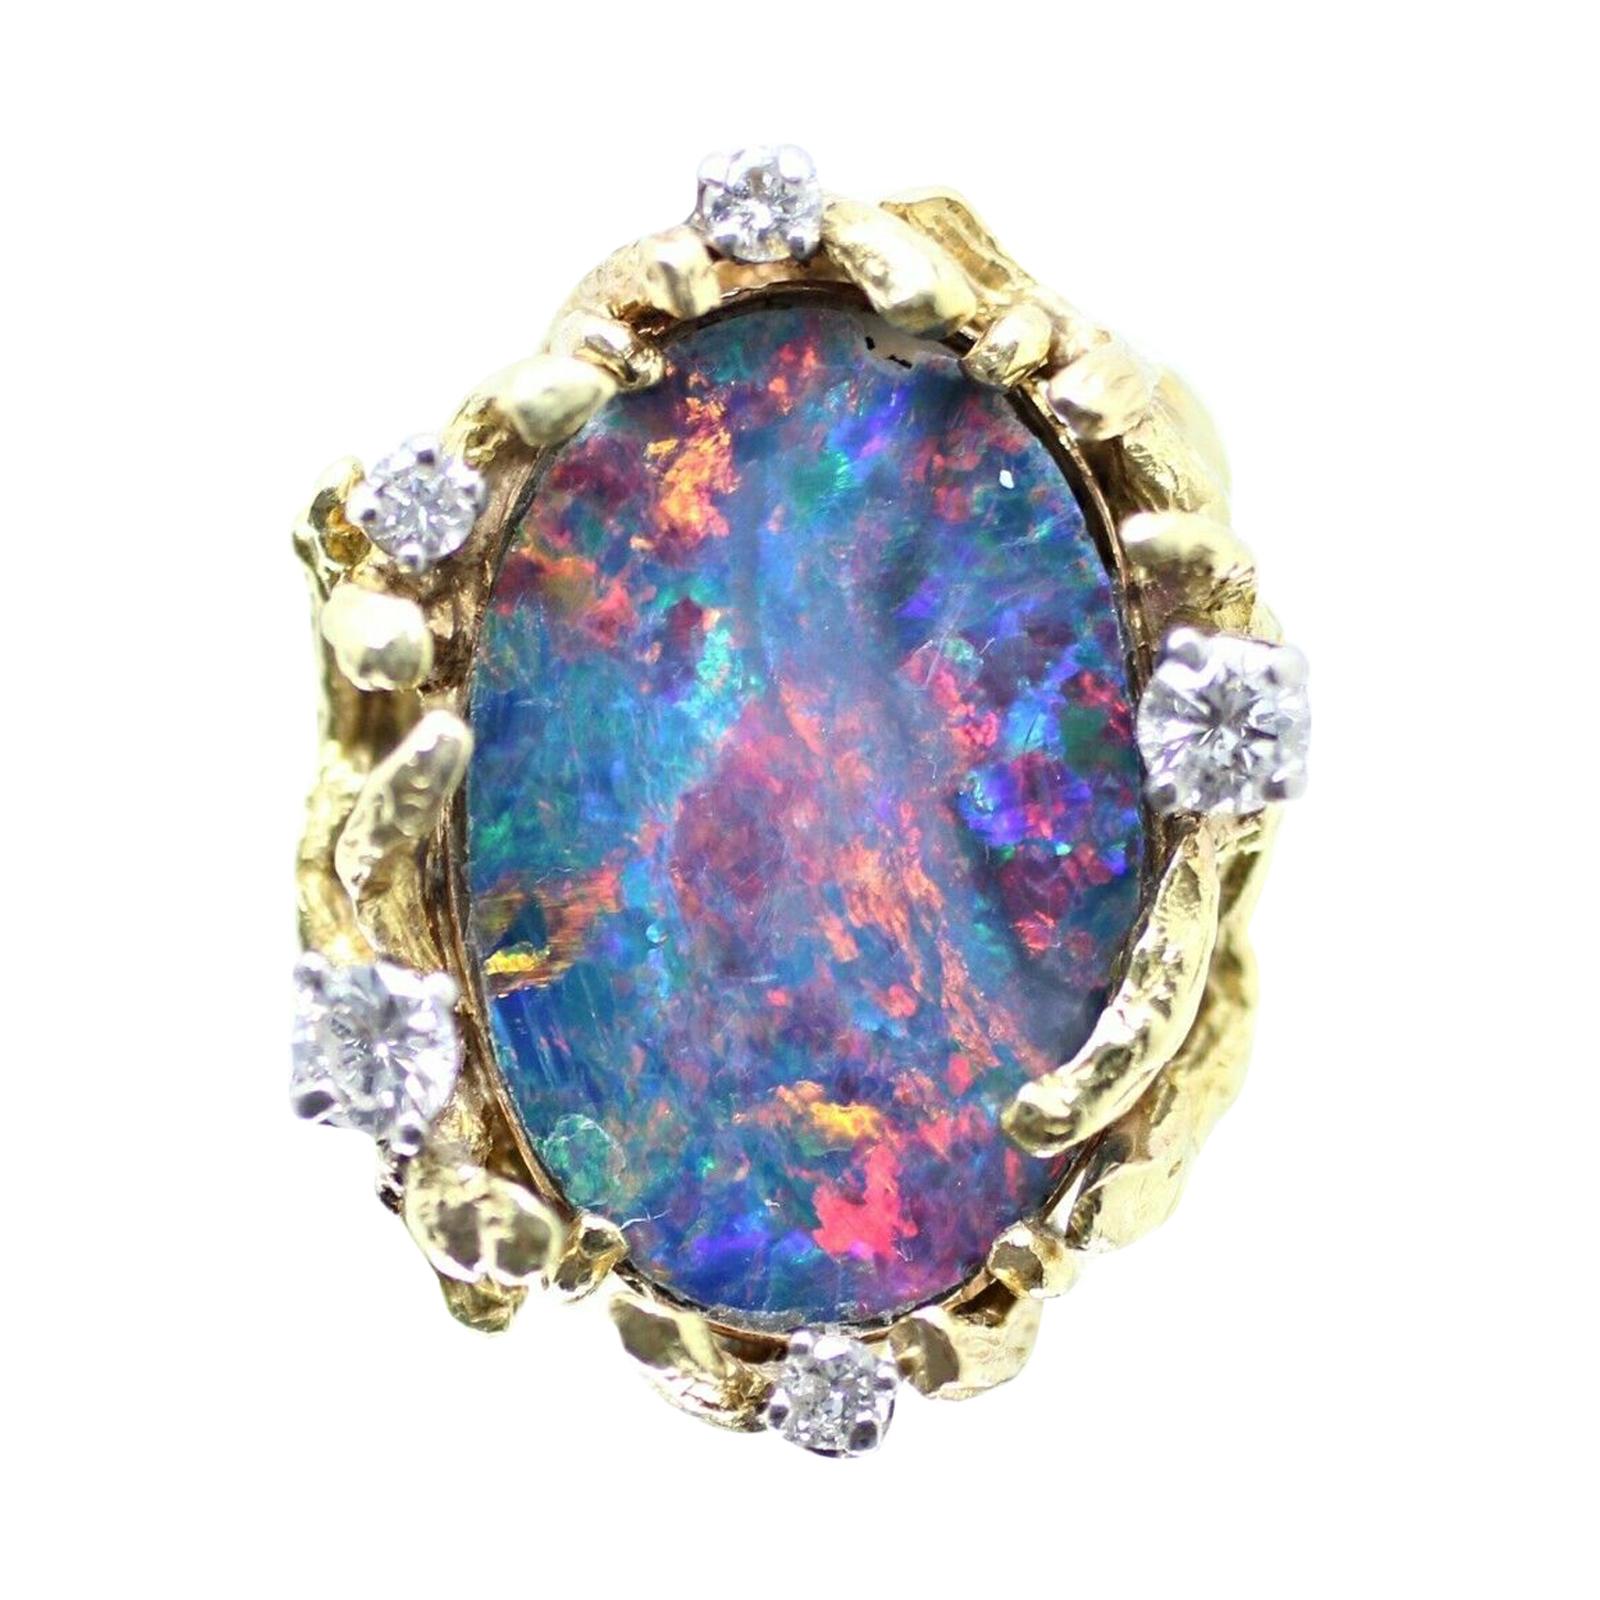 Vintage 14 Karat Yellow Gold Opal "Doublet" and Diamond Ring, Containing